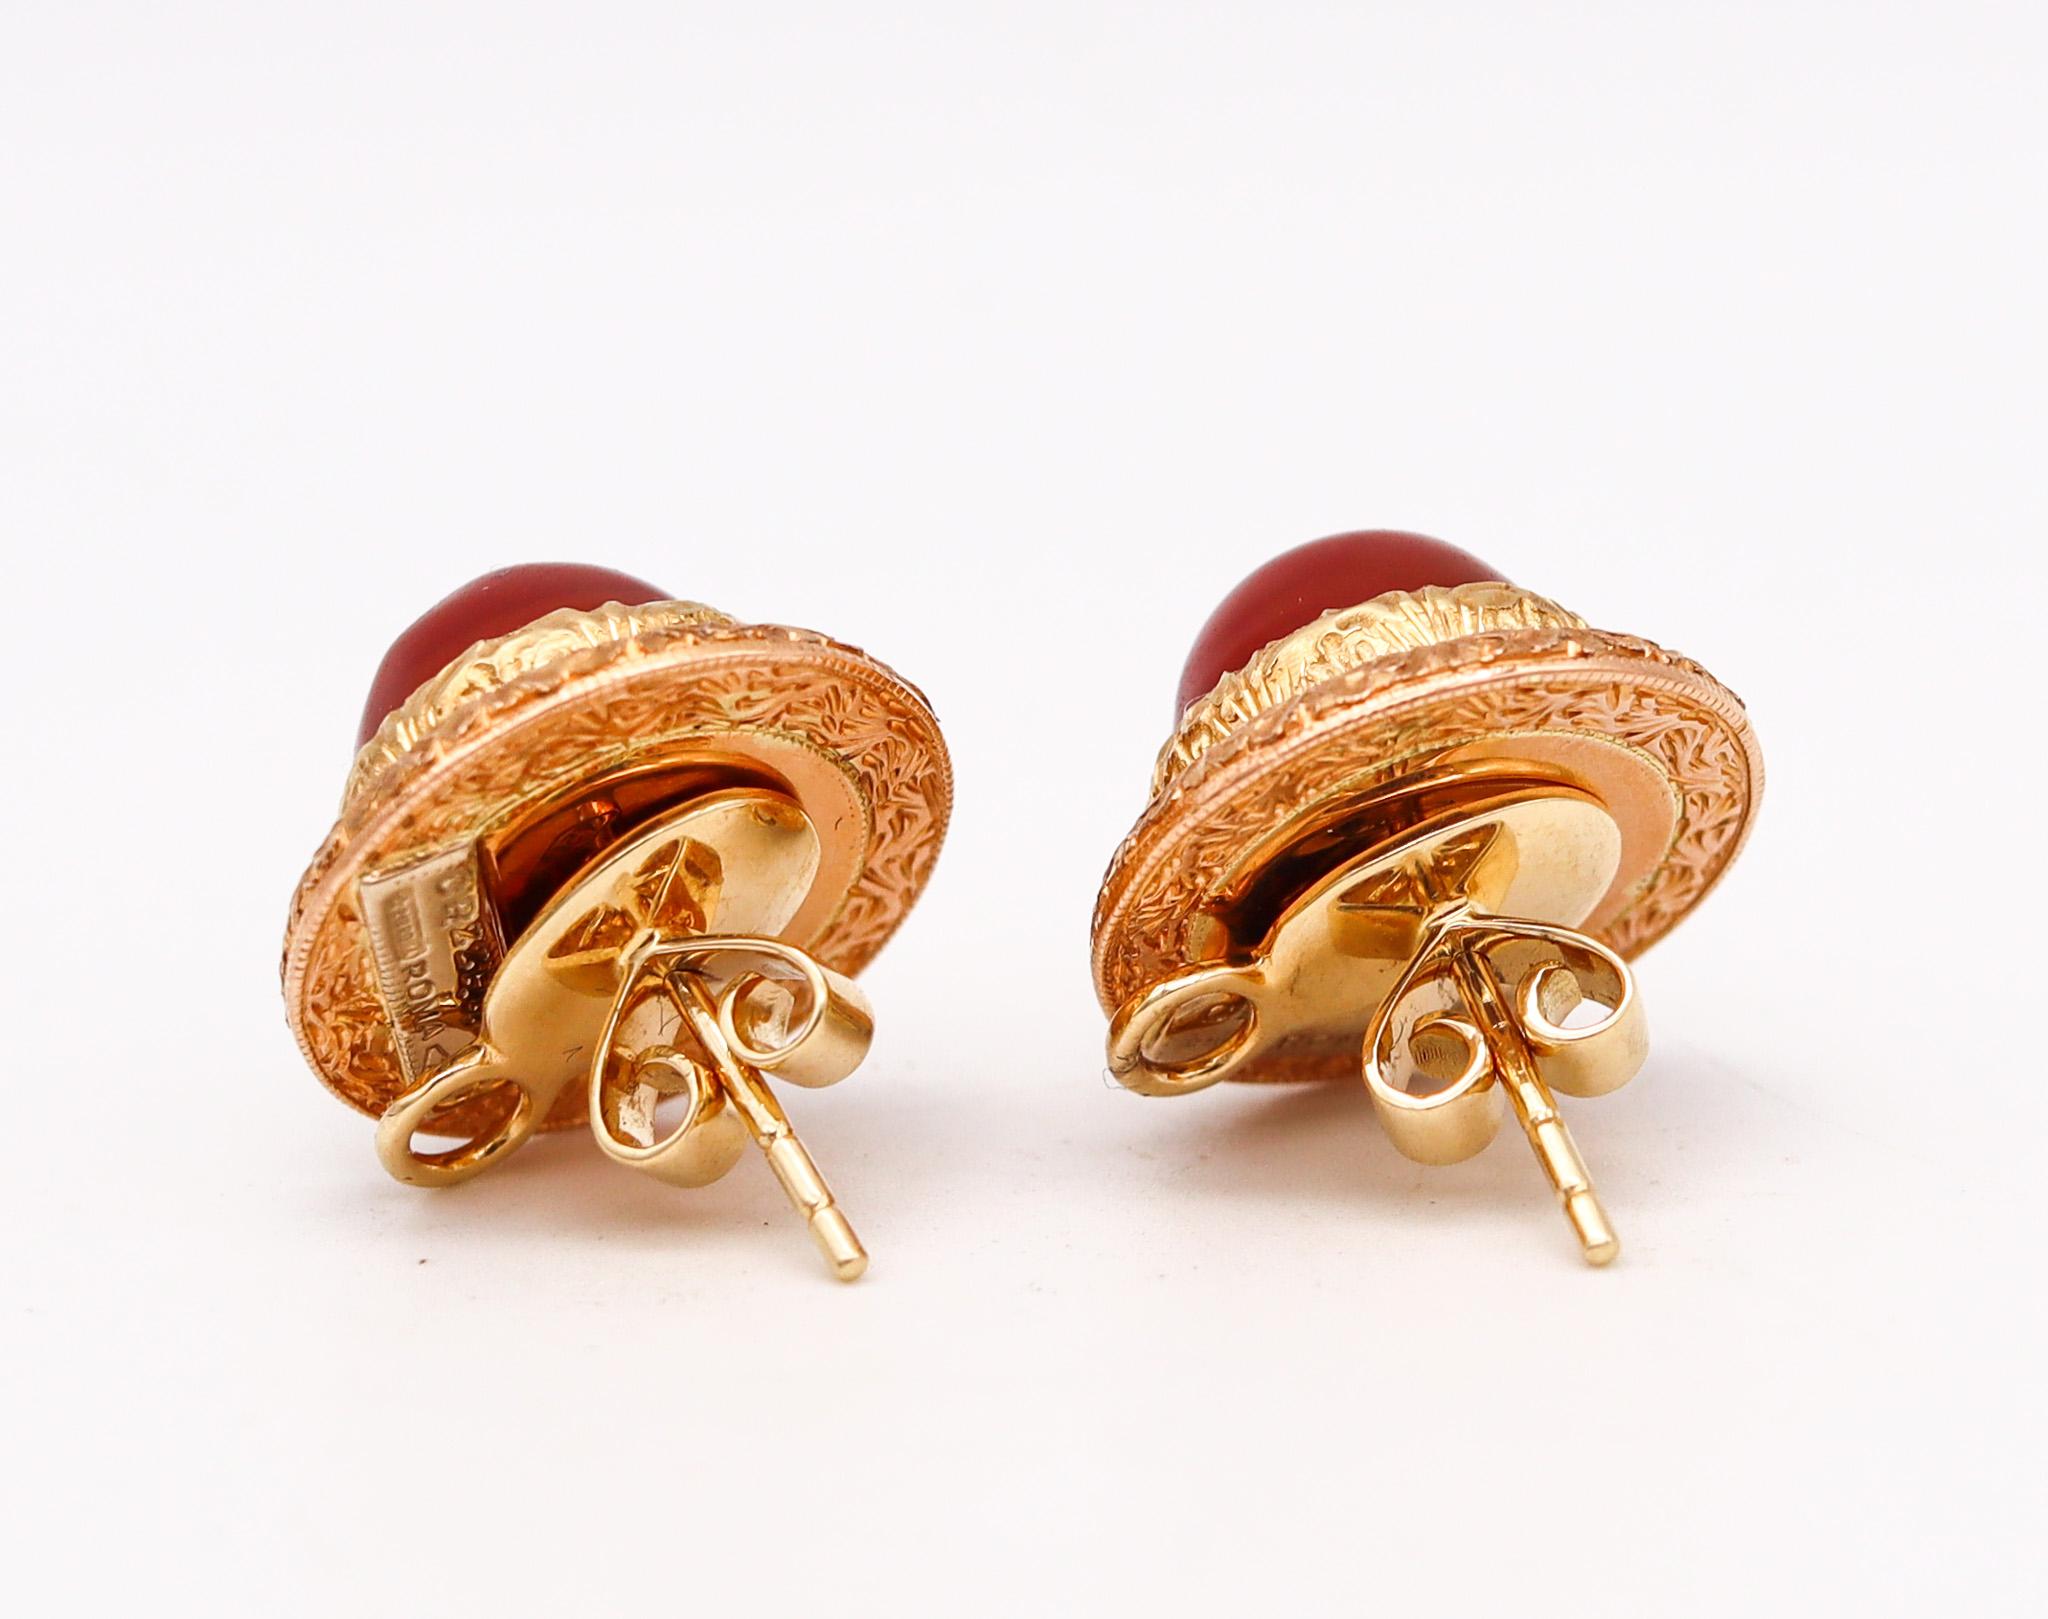 Baroque Cazzaniga Roma 1970 Studs Earrings In 18Kt Yellow Gold With 13.5 Ctw Carnelians